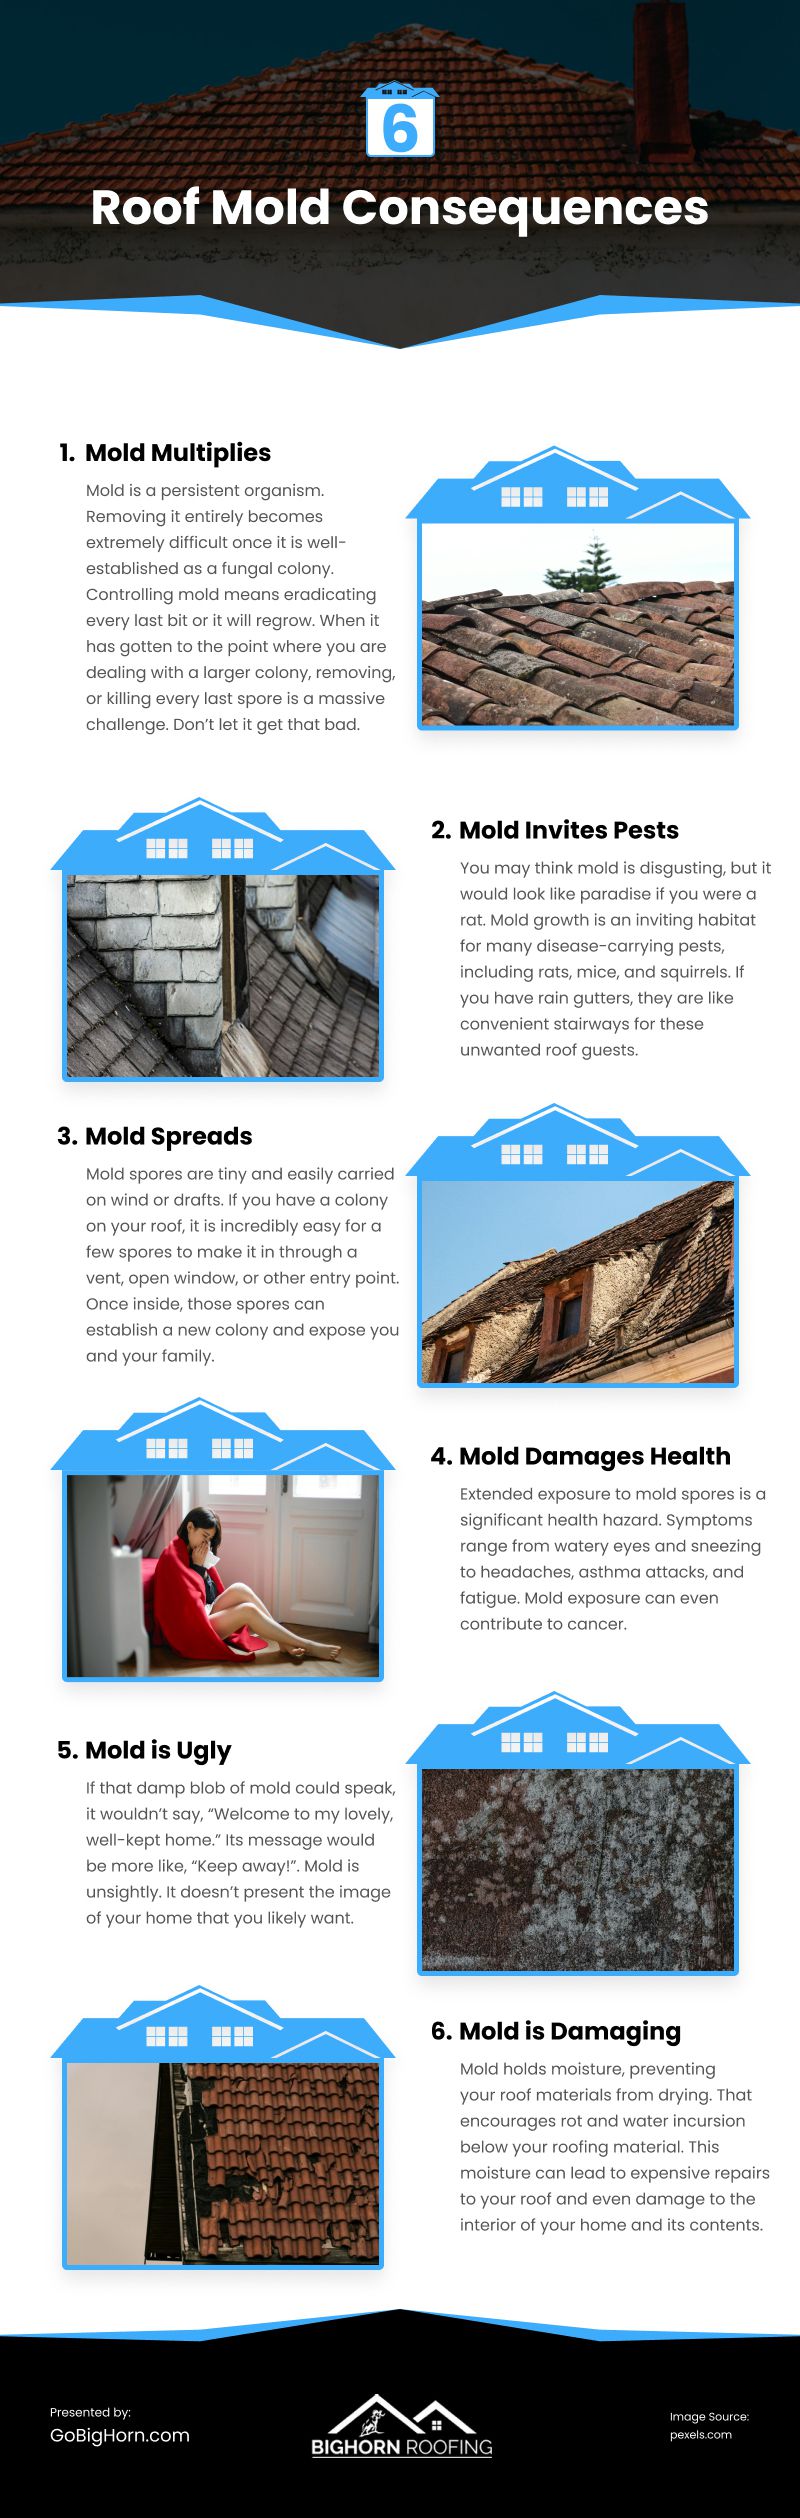 6 Roof Mold Consequences Infographic